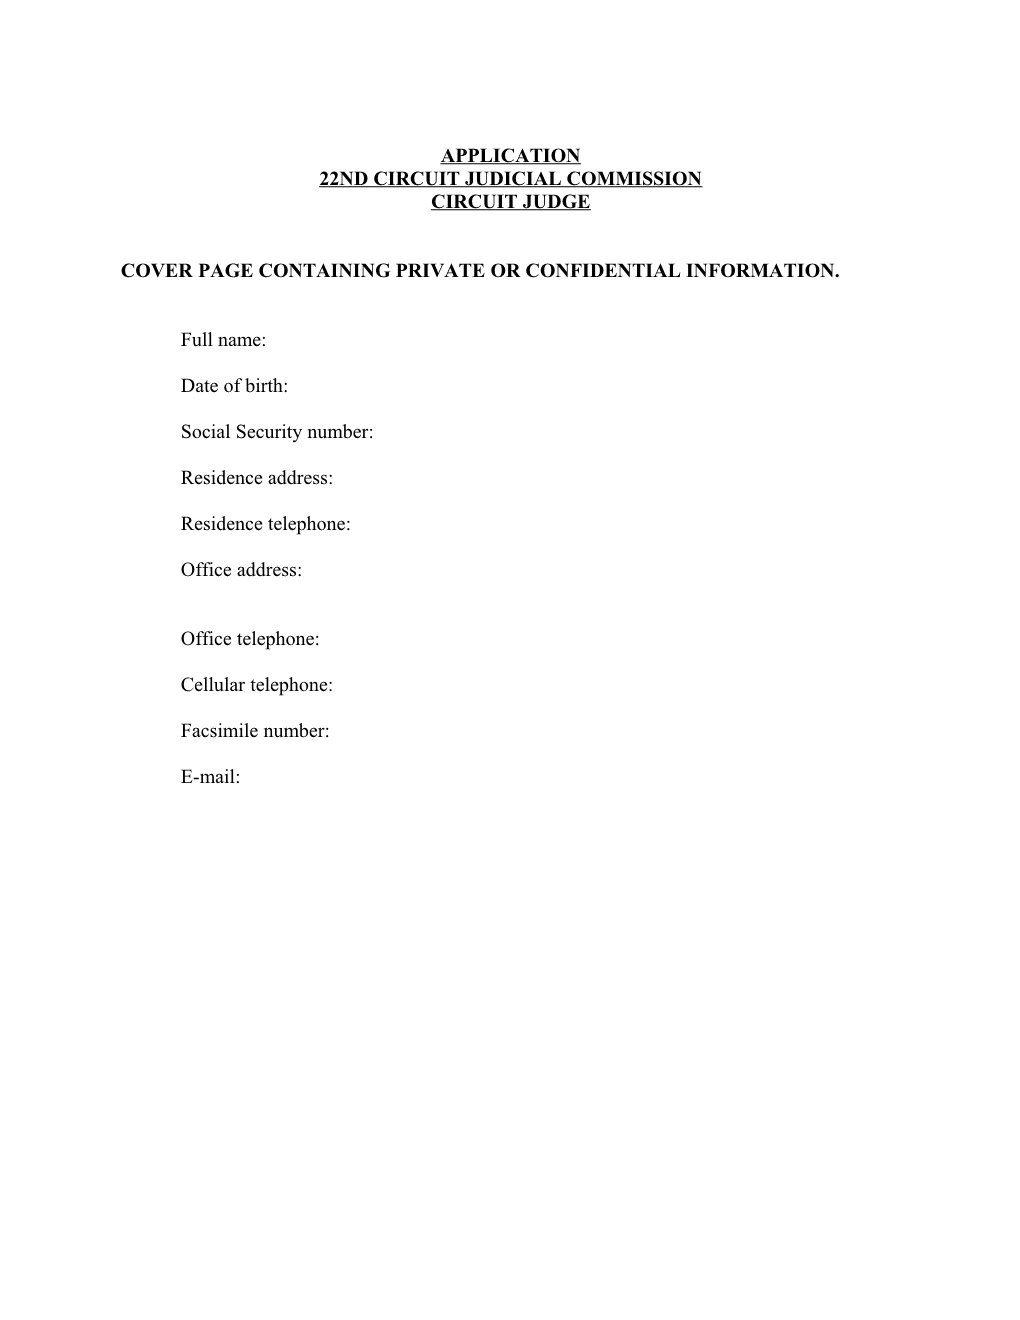 Cover Page Containing Private Or Confidential Information